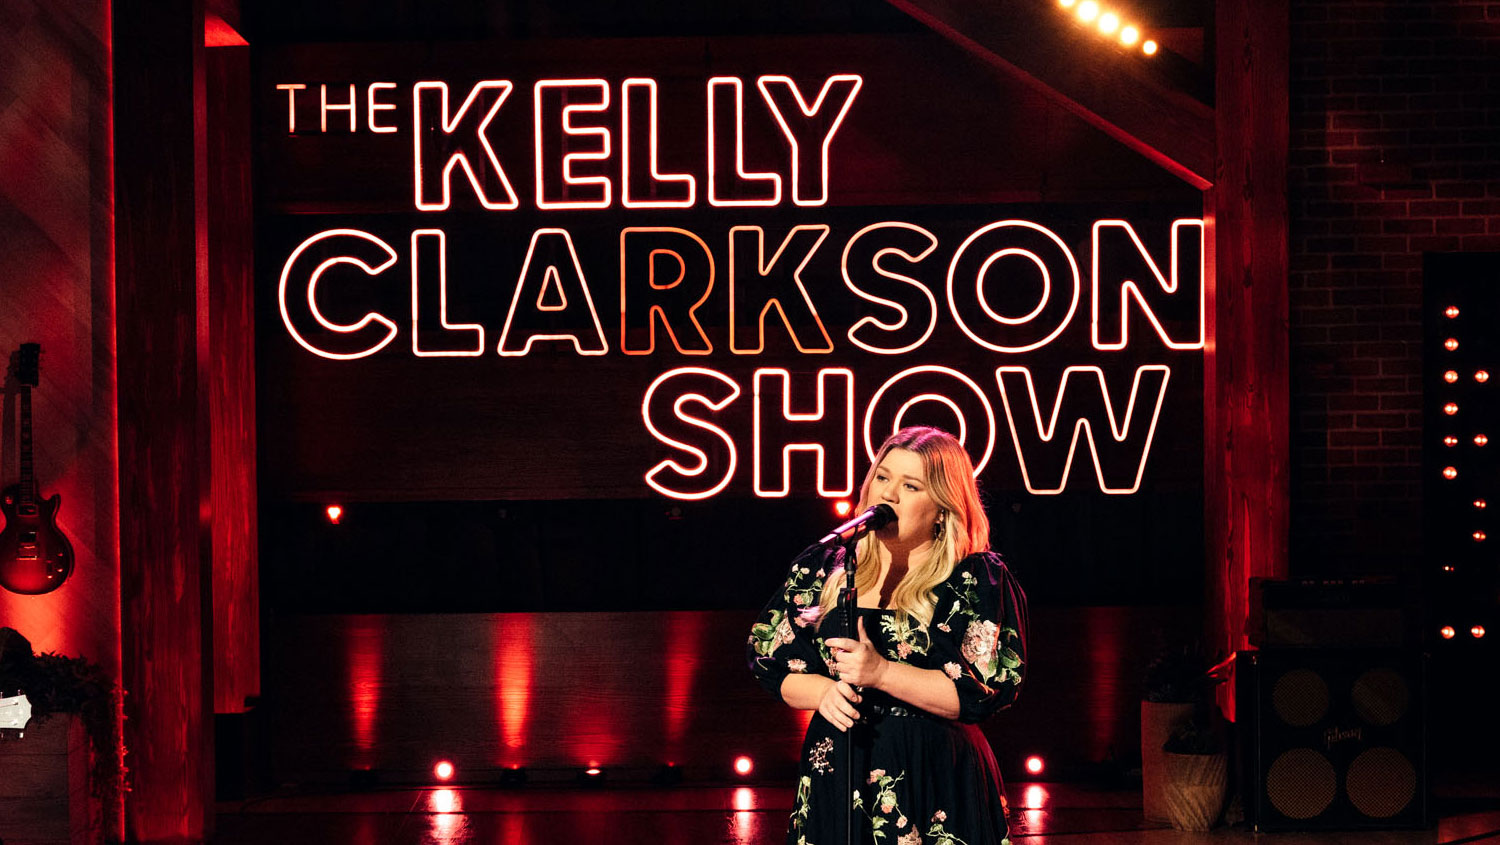 Kelly Clarkson On The Reason She’s Relocating Talk Show To New York City